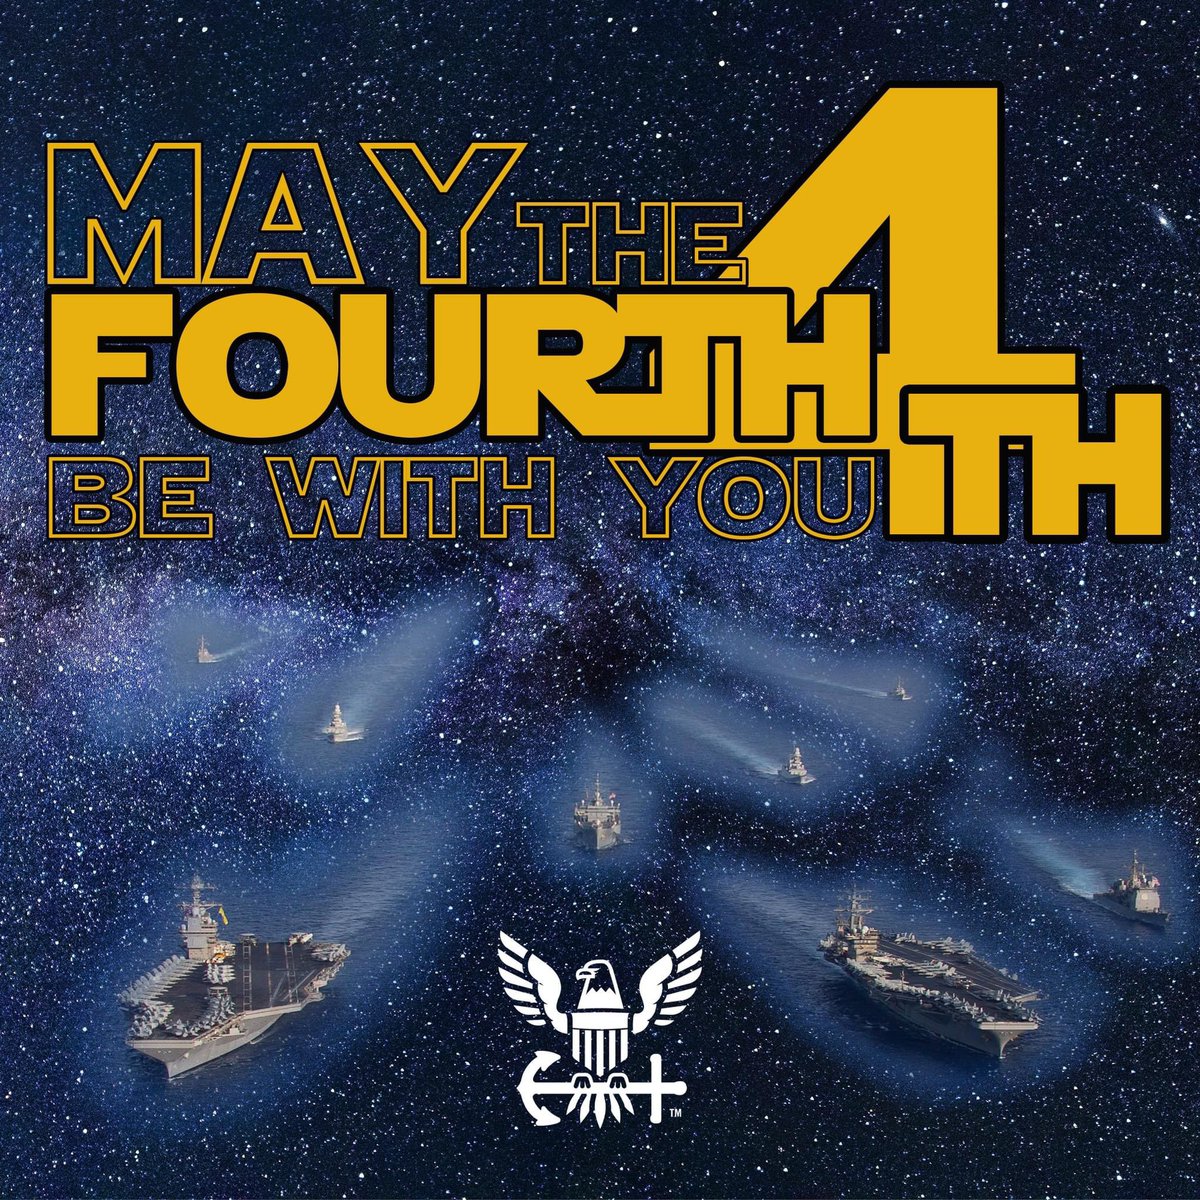 Under the stars, across the 7 seas, your Navy is operating to keep the galaxy safe and secure. #Maythe4th be with you.